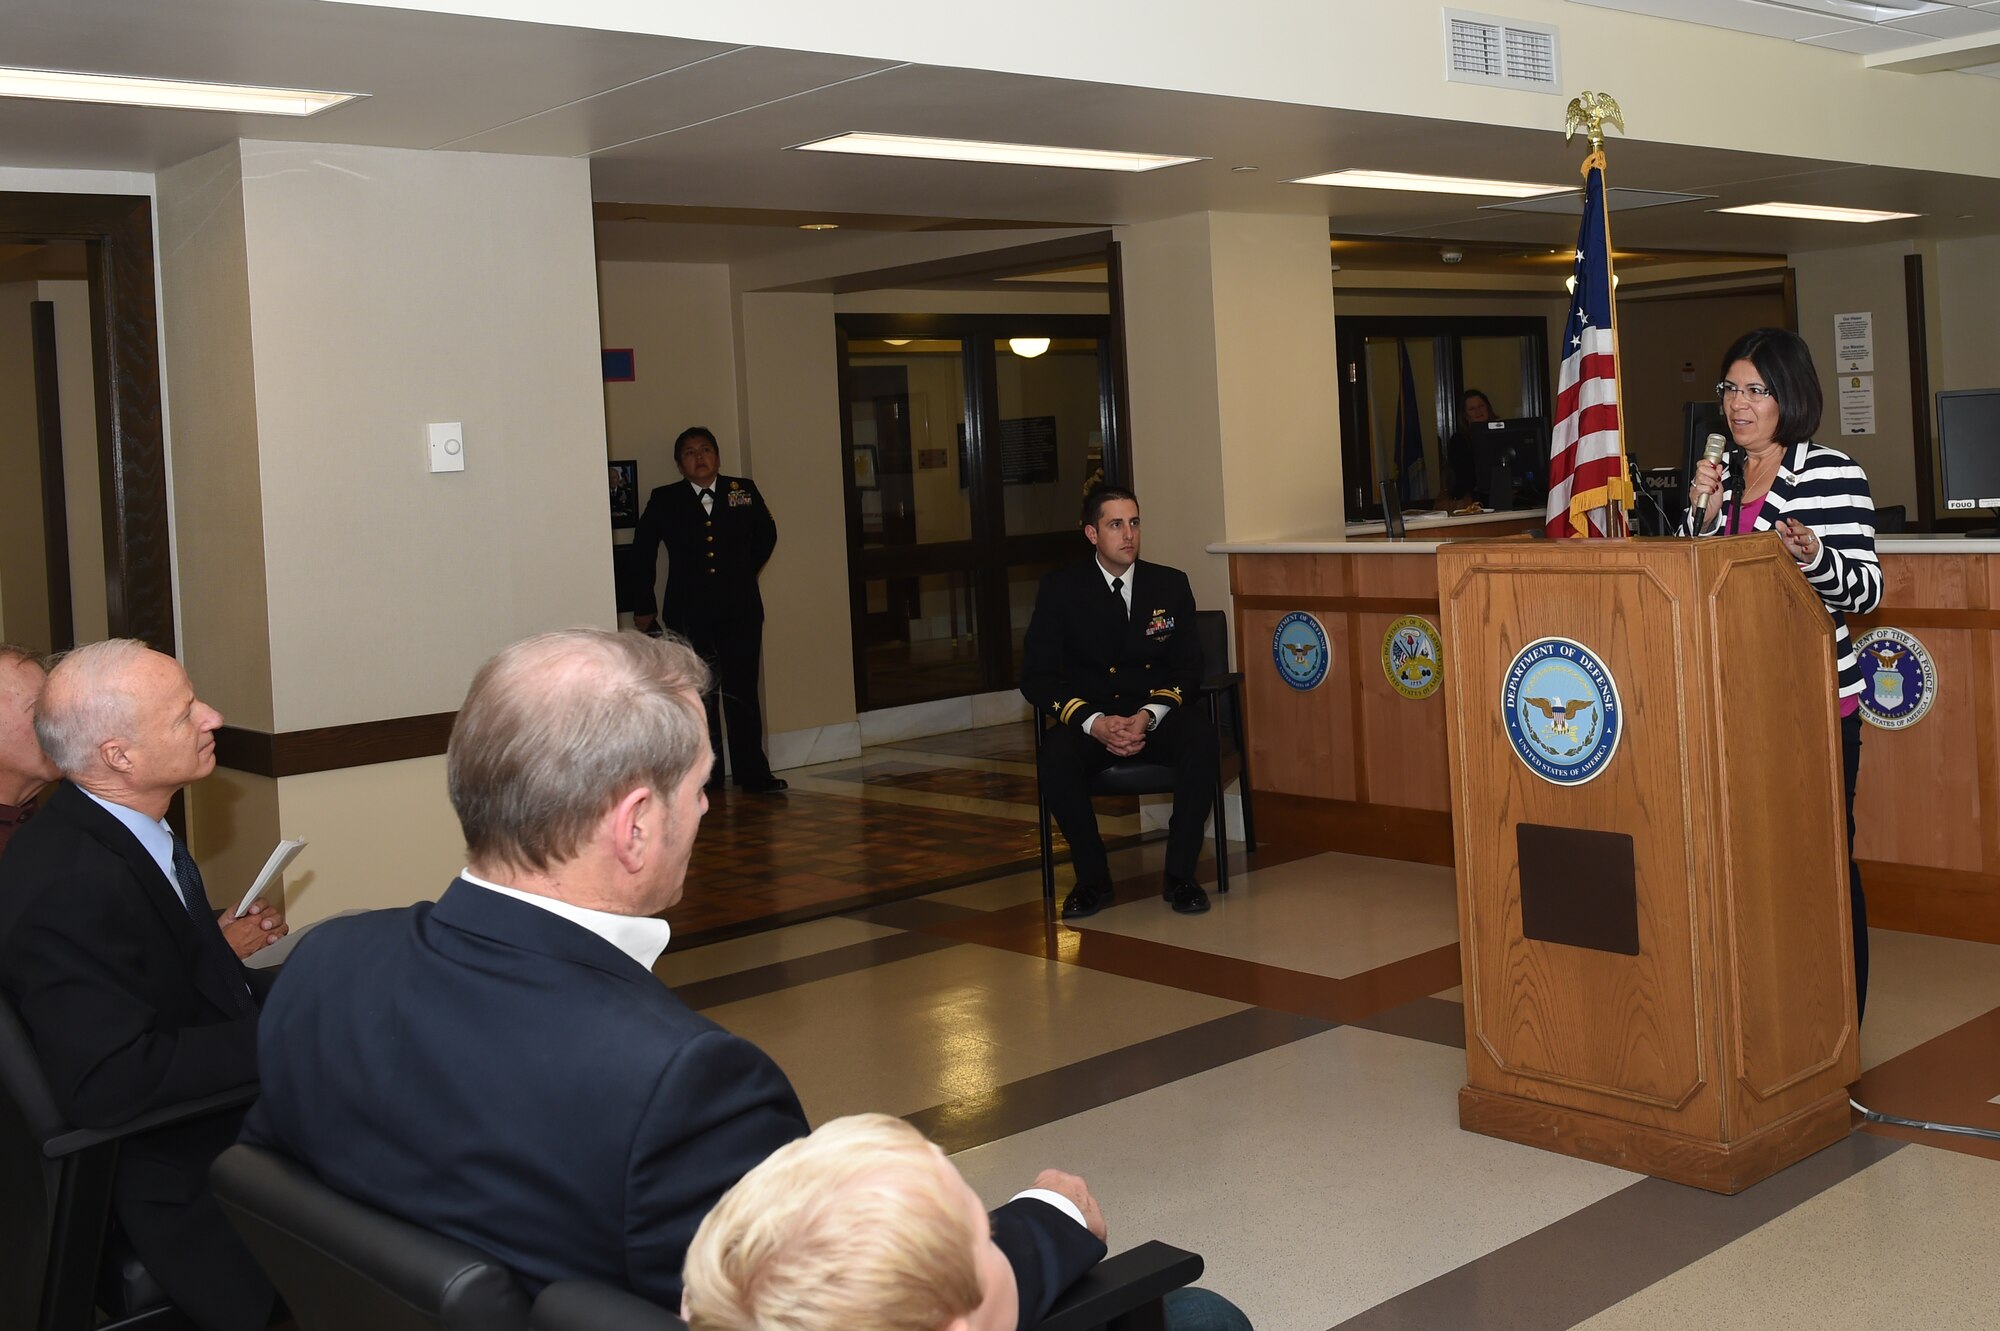 Cindy Dietz speaks during the rededication of the Denver Military Entrance Processing Station ceremony room in honor of her son, Petty Officer 2nd Class Danny Dietz, Navy SEAL, Oct. 14, 2014 at the Denver MEPS along with members from all branches of military service and Denver community members. Danny was part of a four-person Navy SEAL reconnaissance team deployed to Afghanistan during Operation Enduring Freedom. He was killed during the mission. (U.S. Air Force photo by Airman 1st Class Samantha Saulsbury/Released)